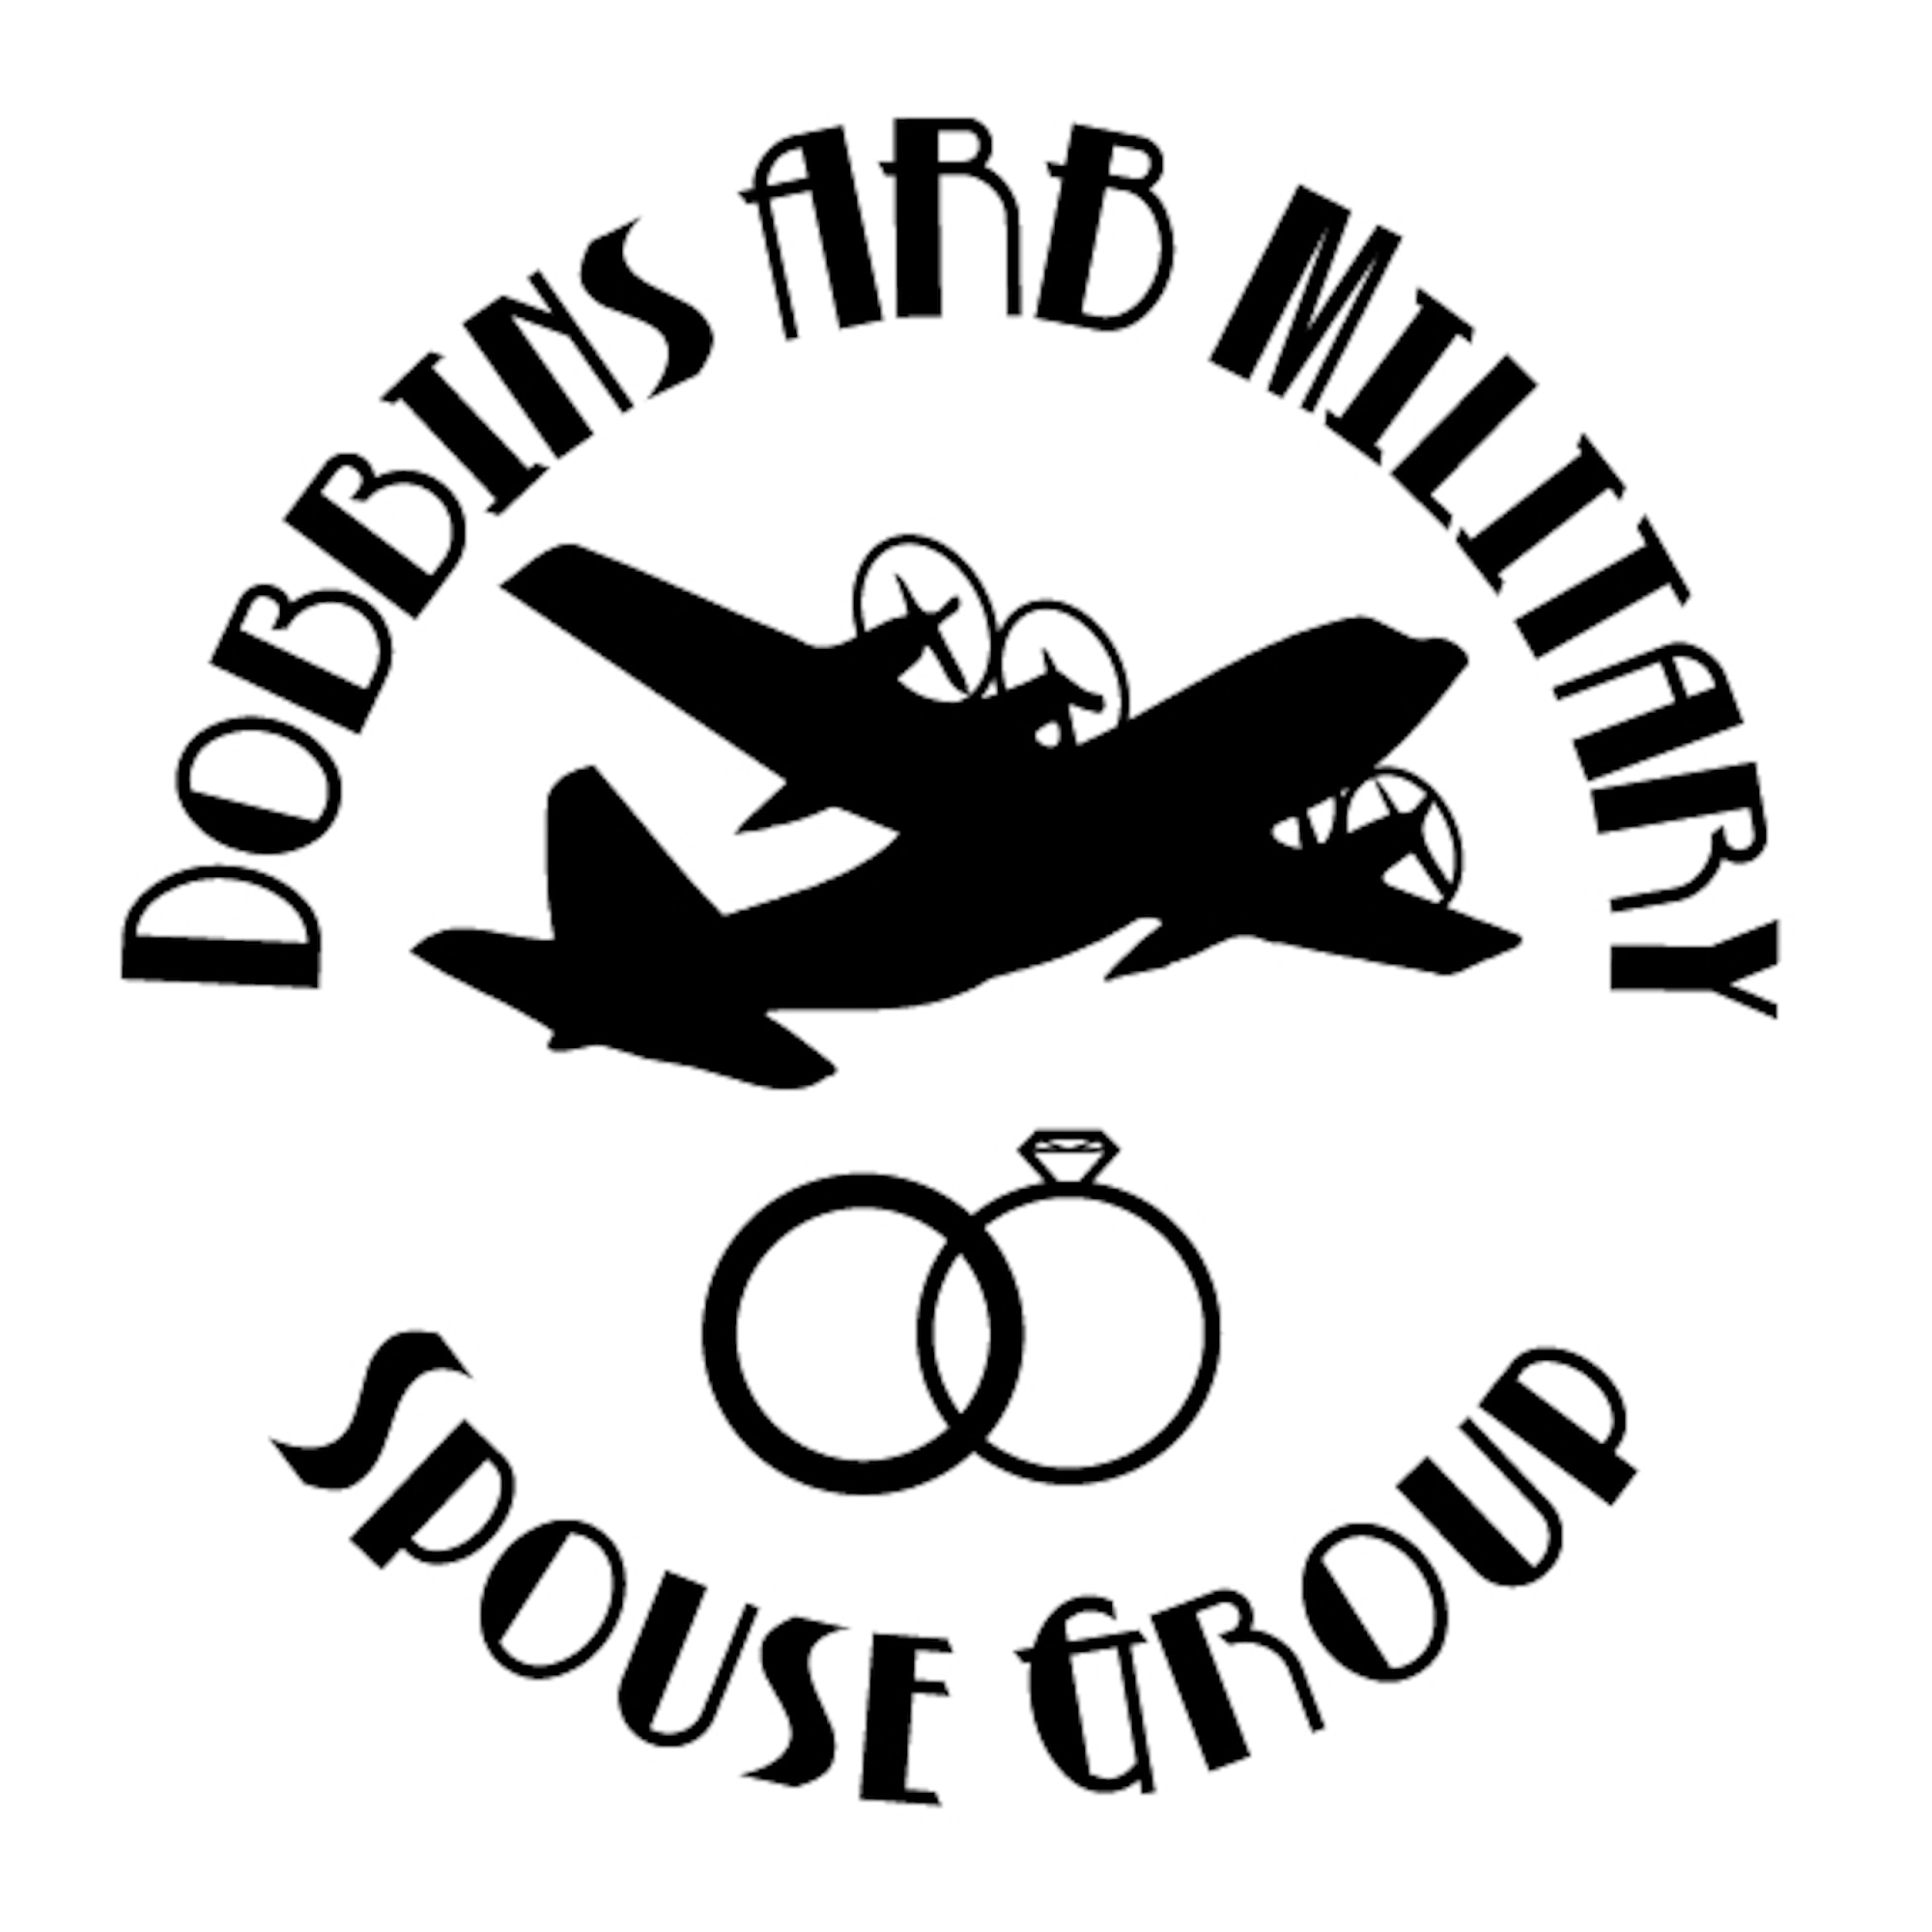 The Dobbins Military Spouse Group is a newly chartered private organization founded by local spouses of Airmen assigned to Dobbins. (Courtesy graphic)